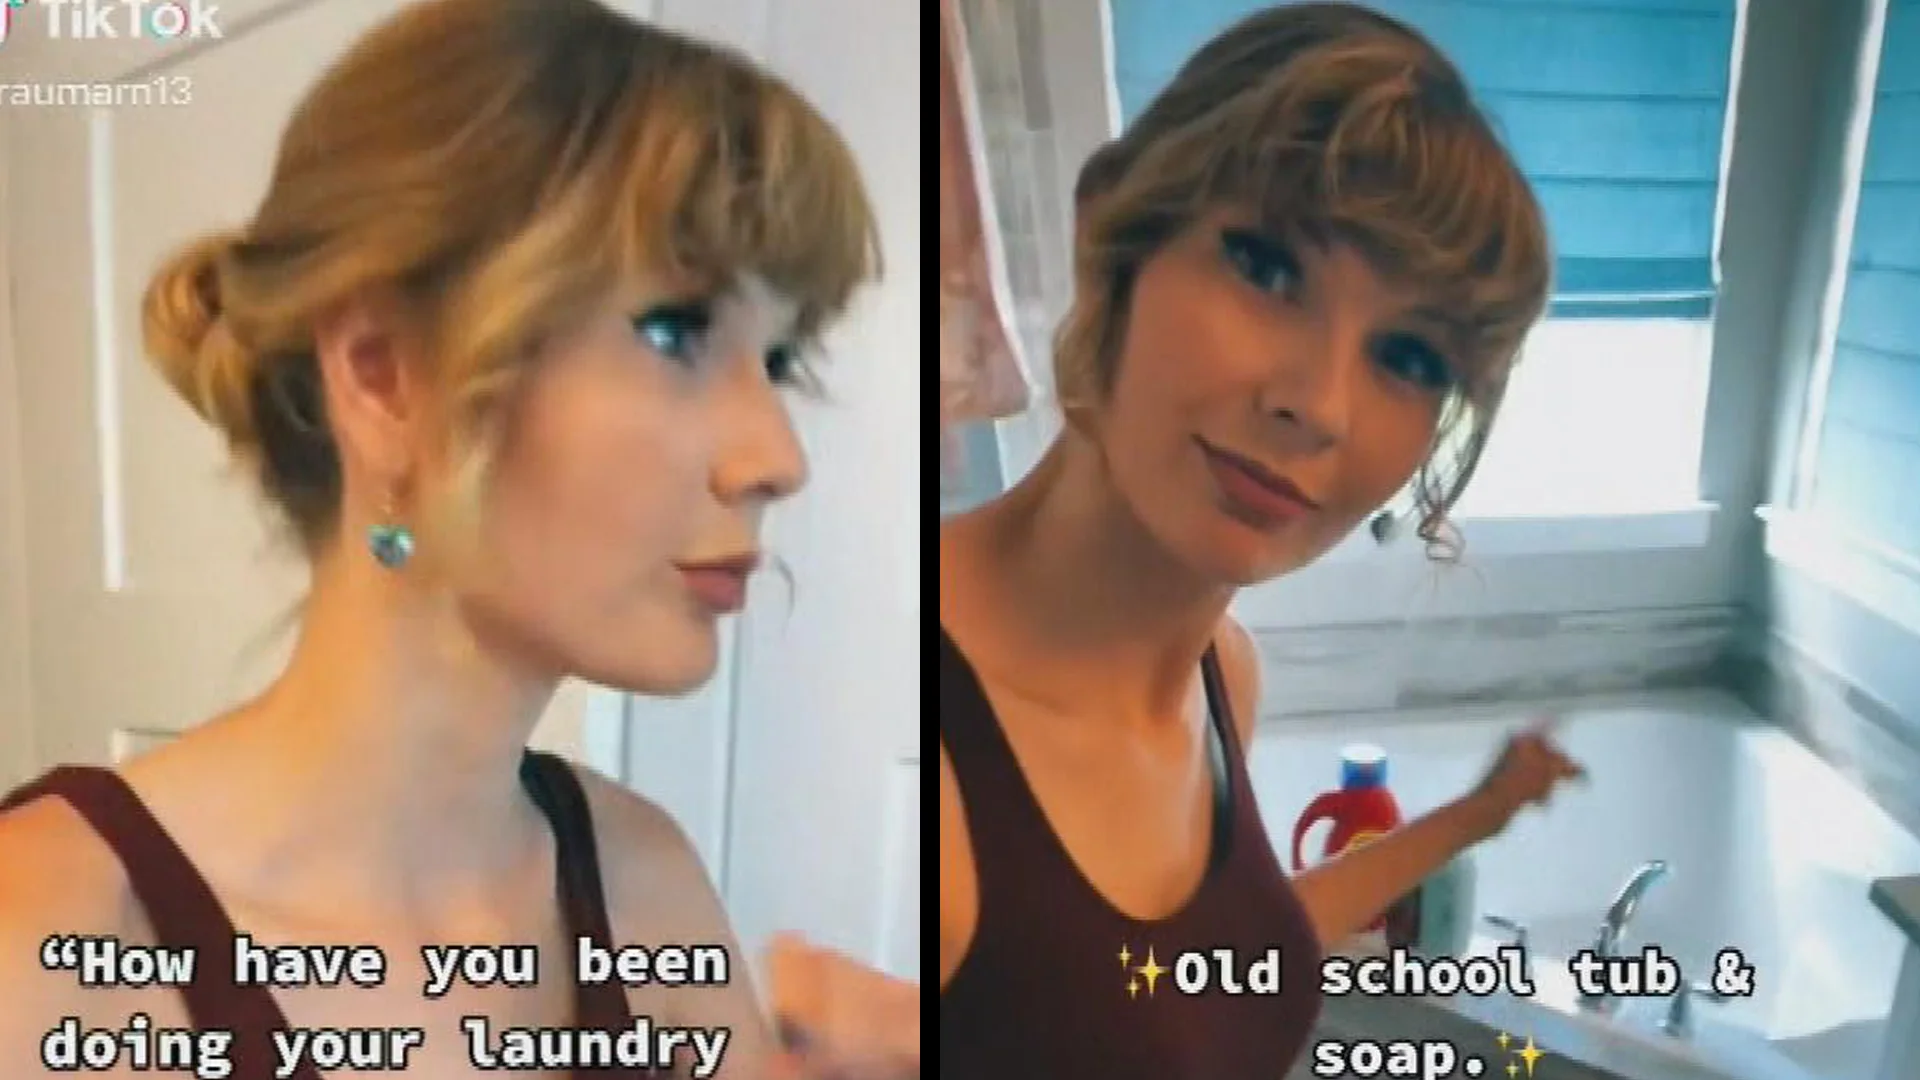 Tennessee nurse shocks and confuses TikTok users with her VERY uncanny resemblance to Taylor Swift - and even has some viewers convinced the pop star does her laundry in the bathtub